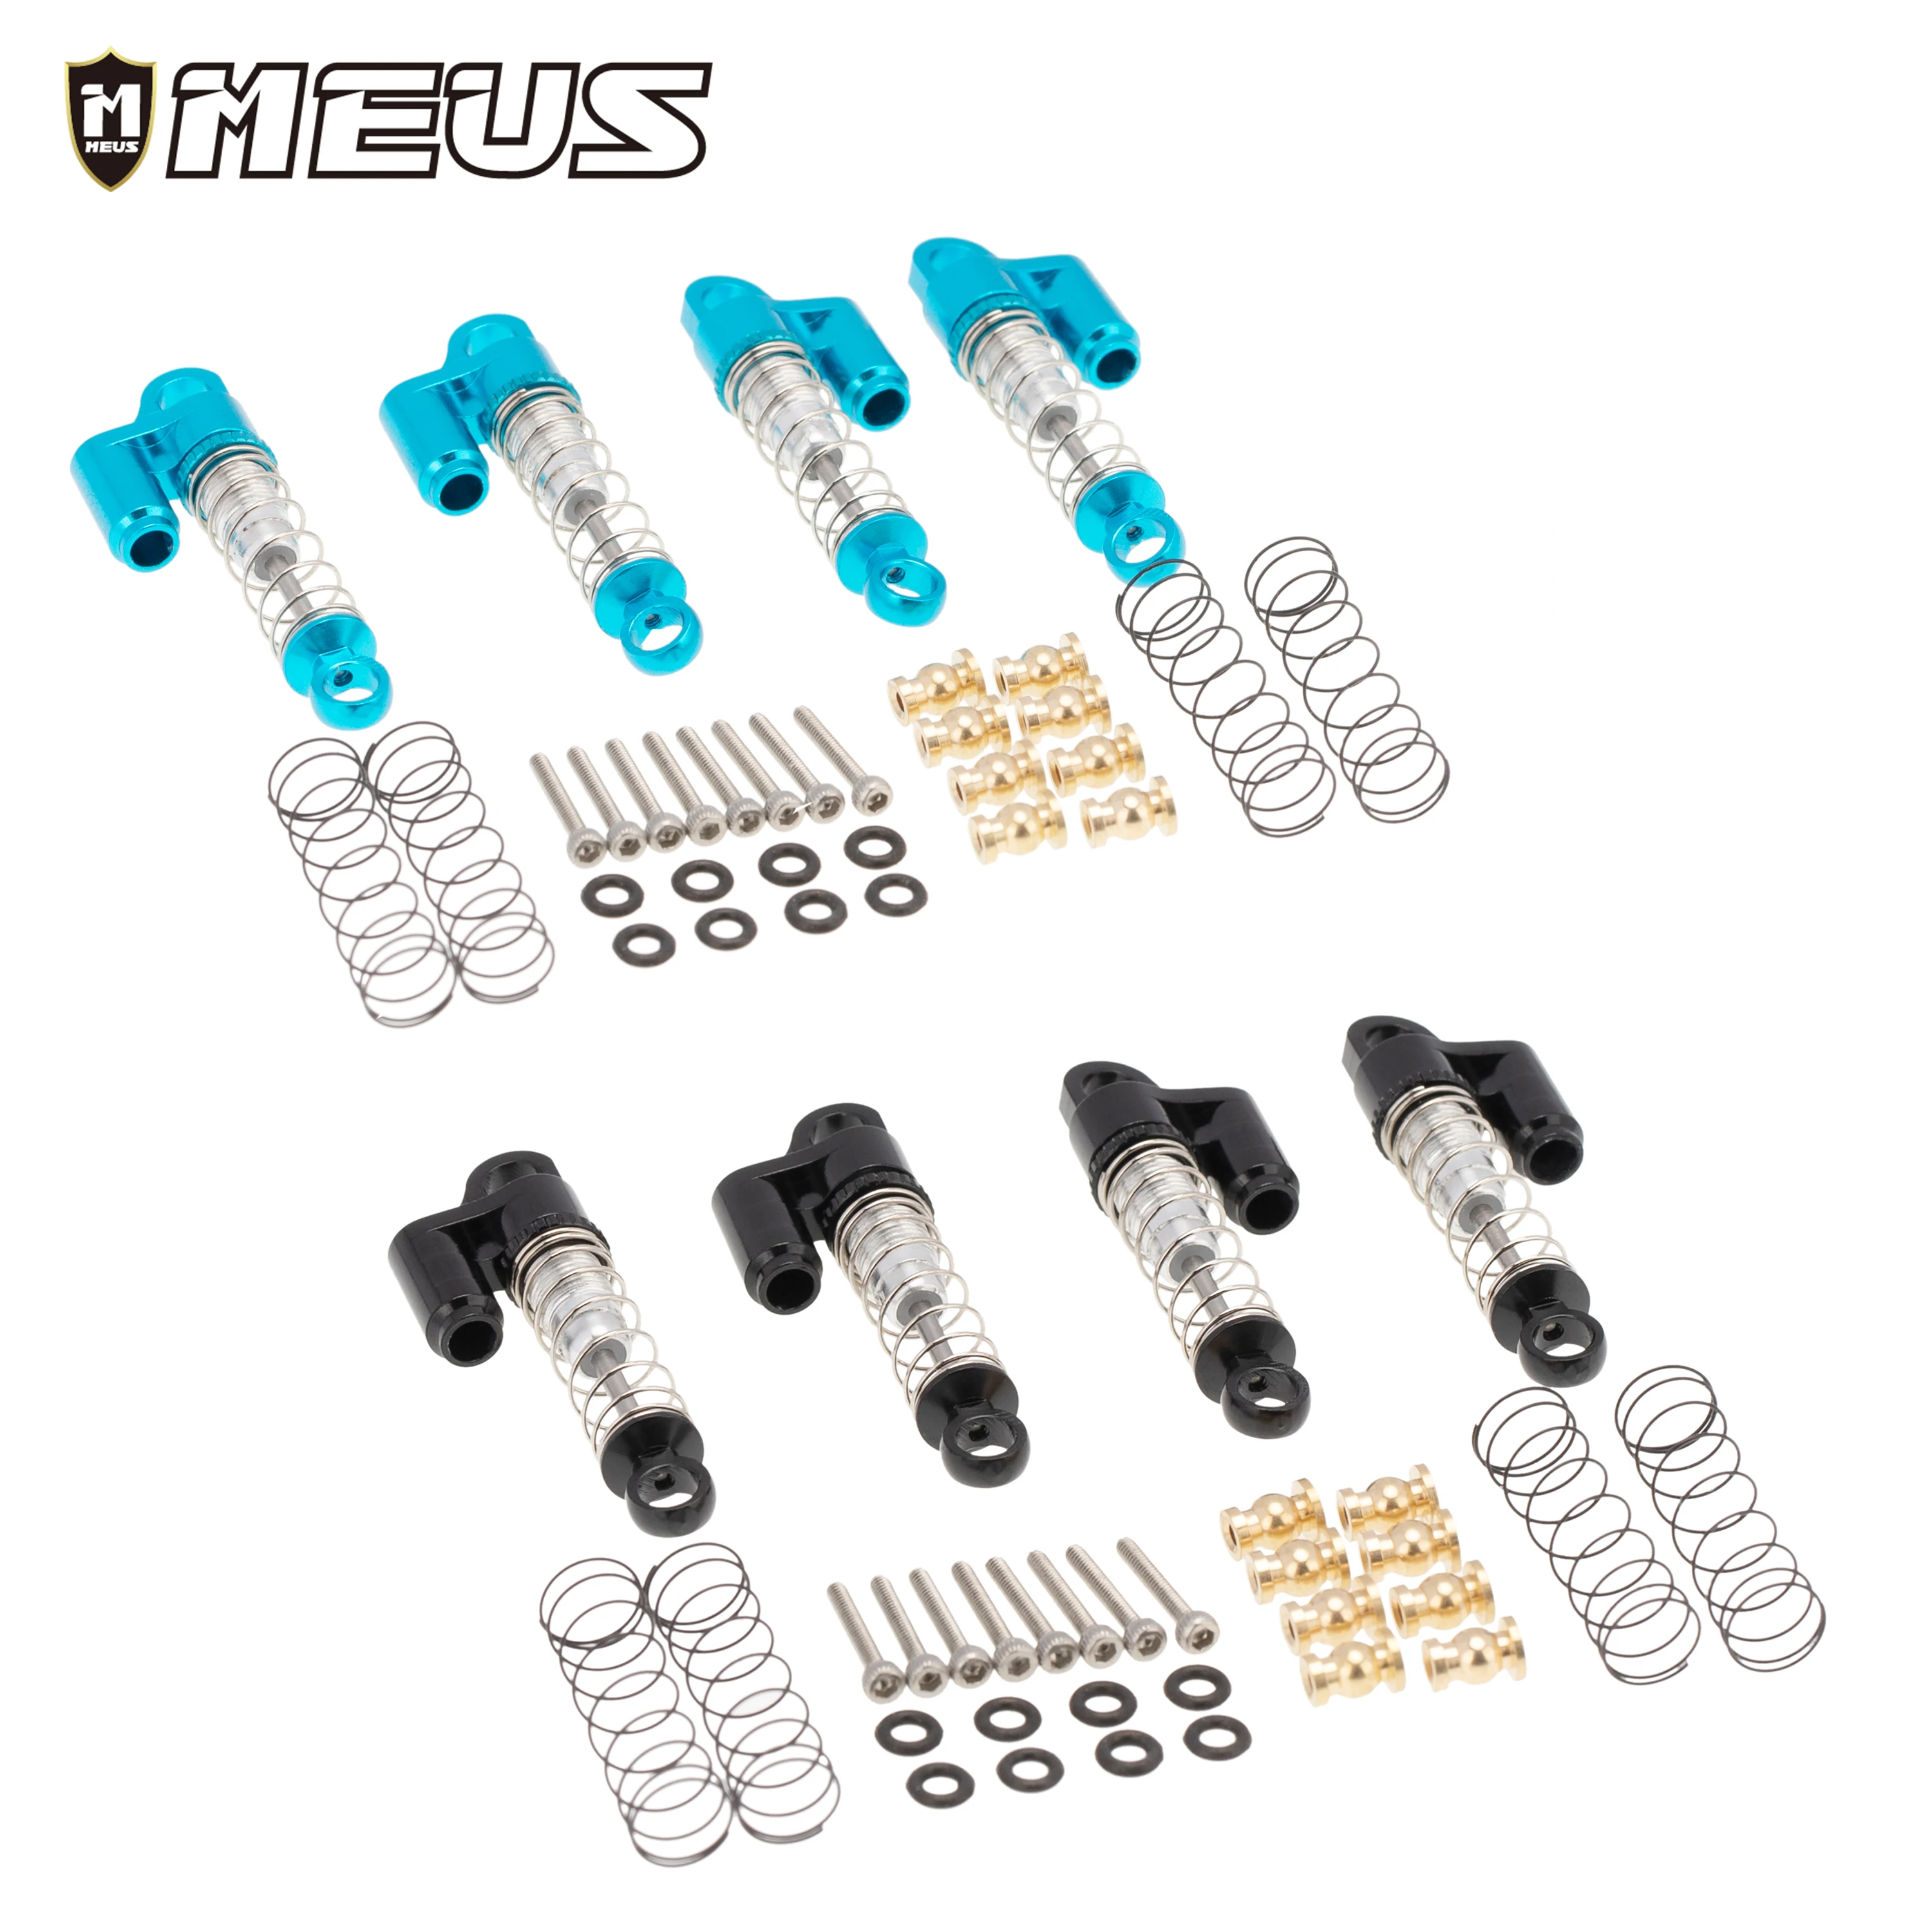 

MEUS Aluminum Alloy Double Tube Shock Absorber Metal Shocks Spring Damper for 1/24 Axial SCX24 90081 RC Car